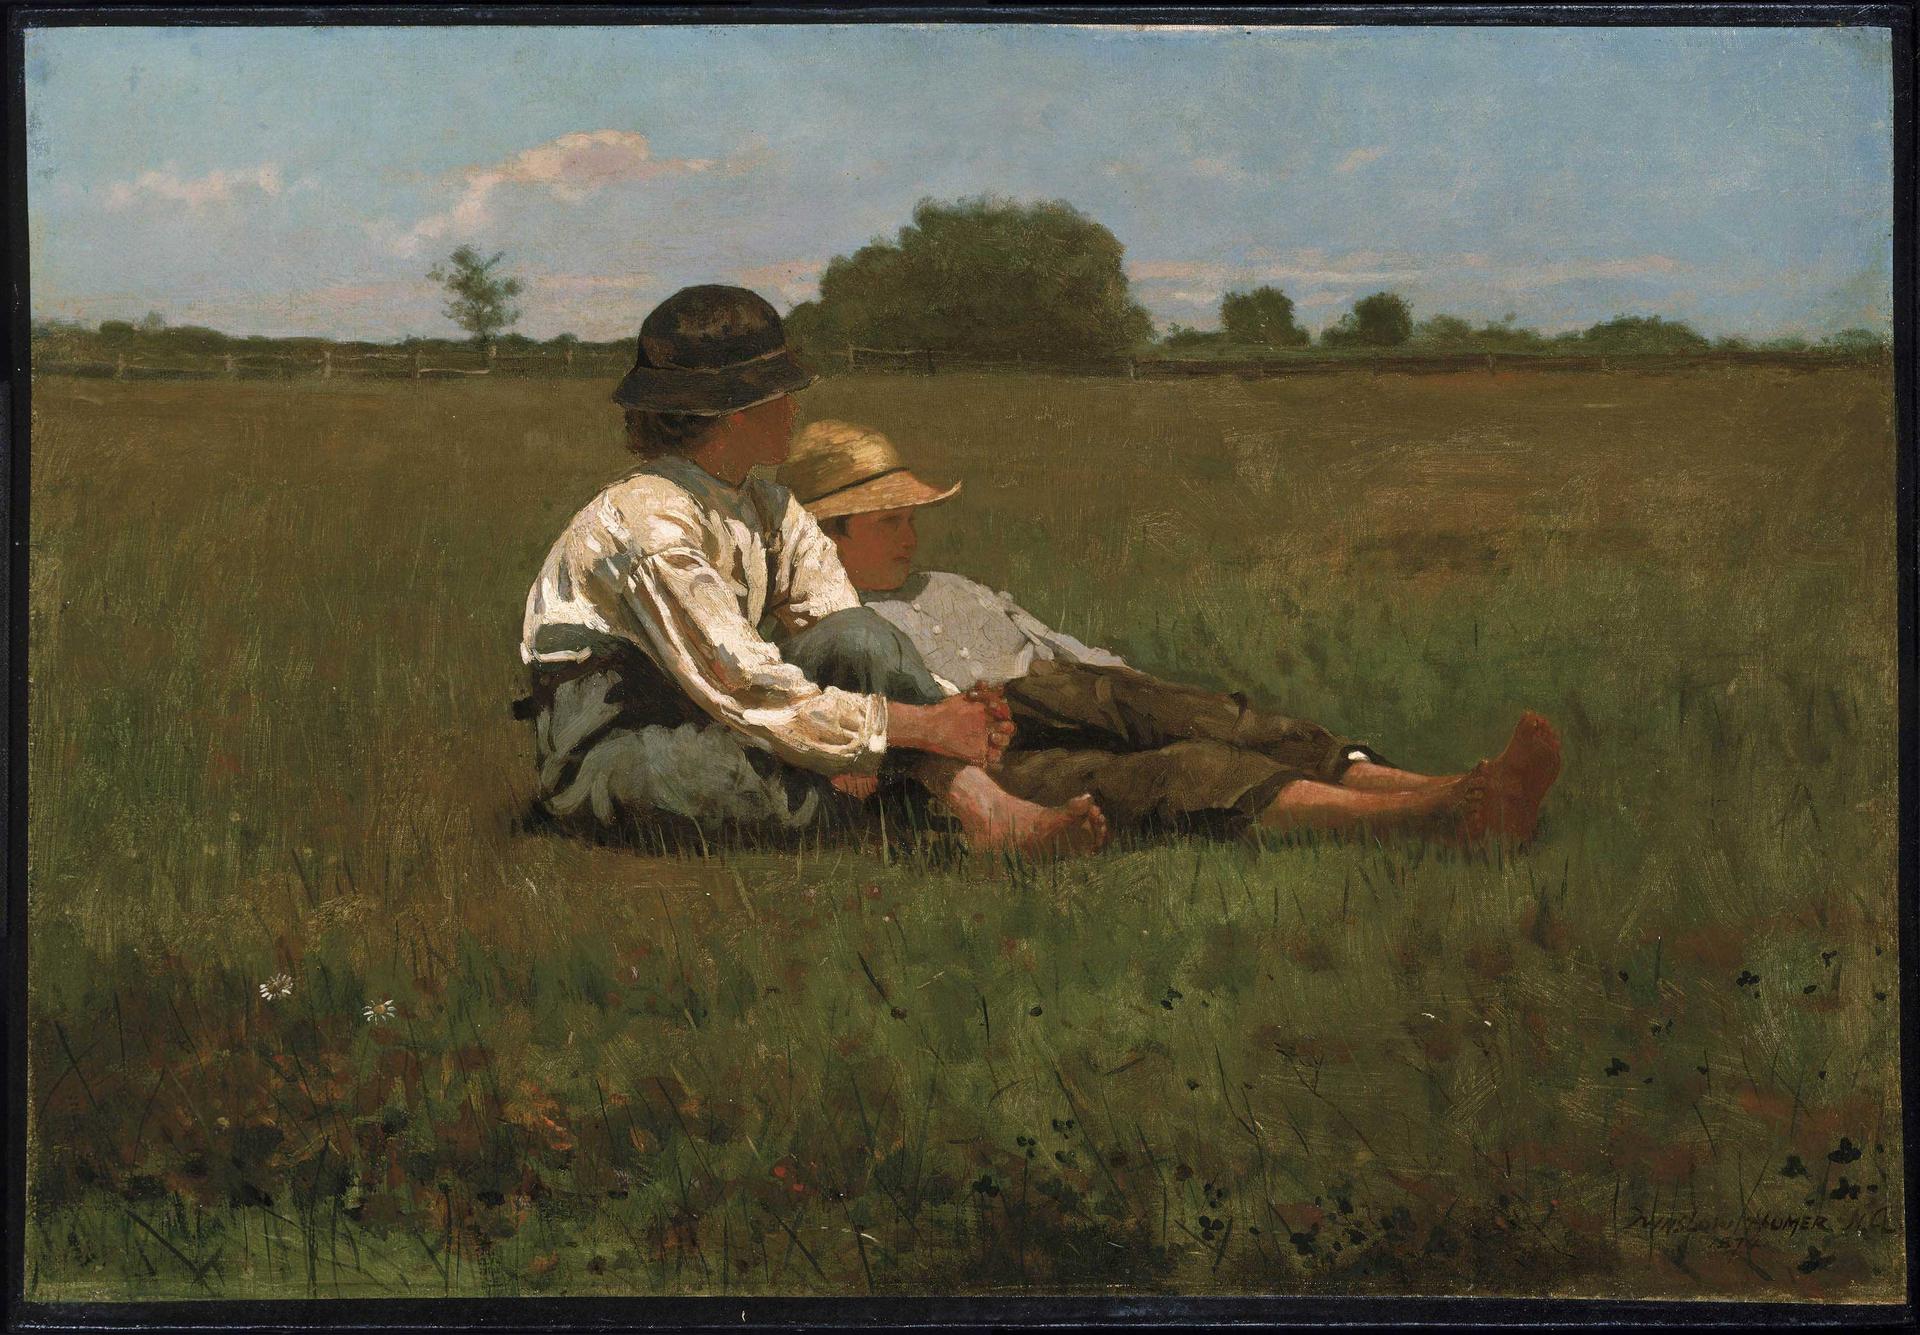 Boys in a Pasture, Winslow Homer, 1874